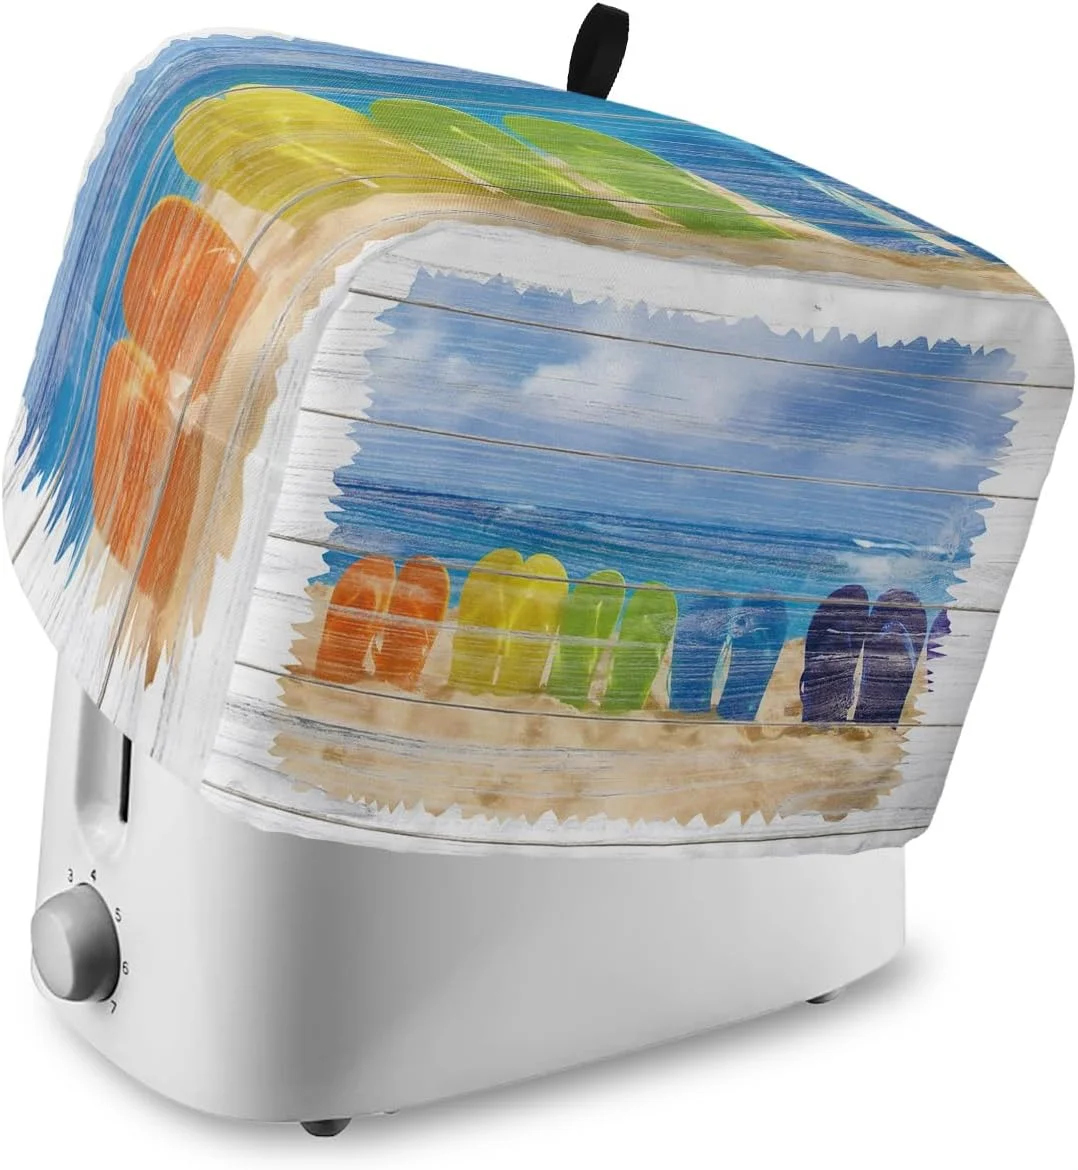 Toaster Covers 2 Slice Summer Beach Bread Maker Cover Review